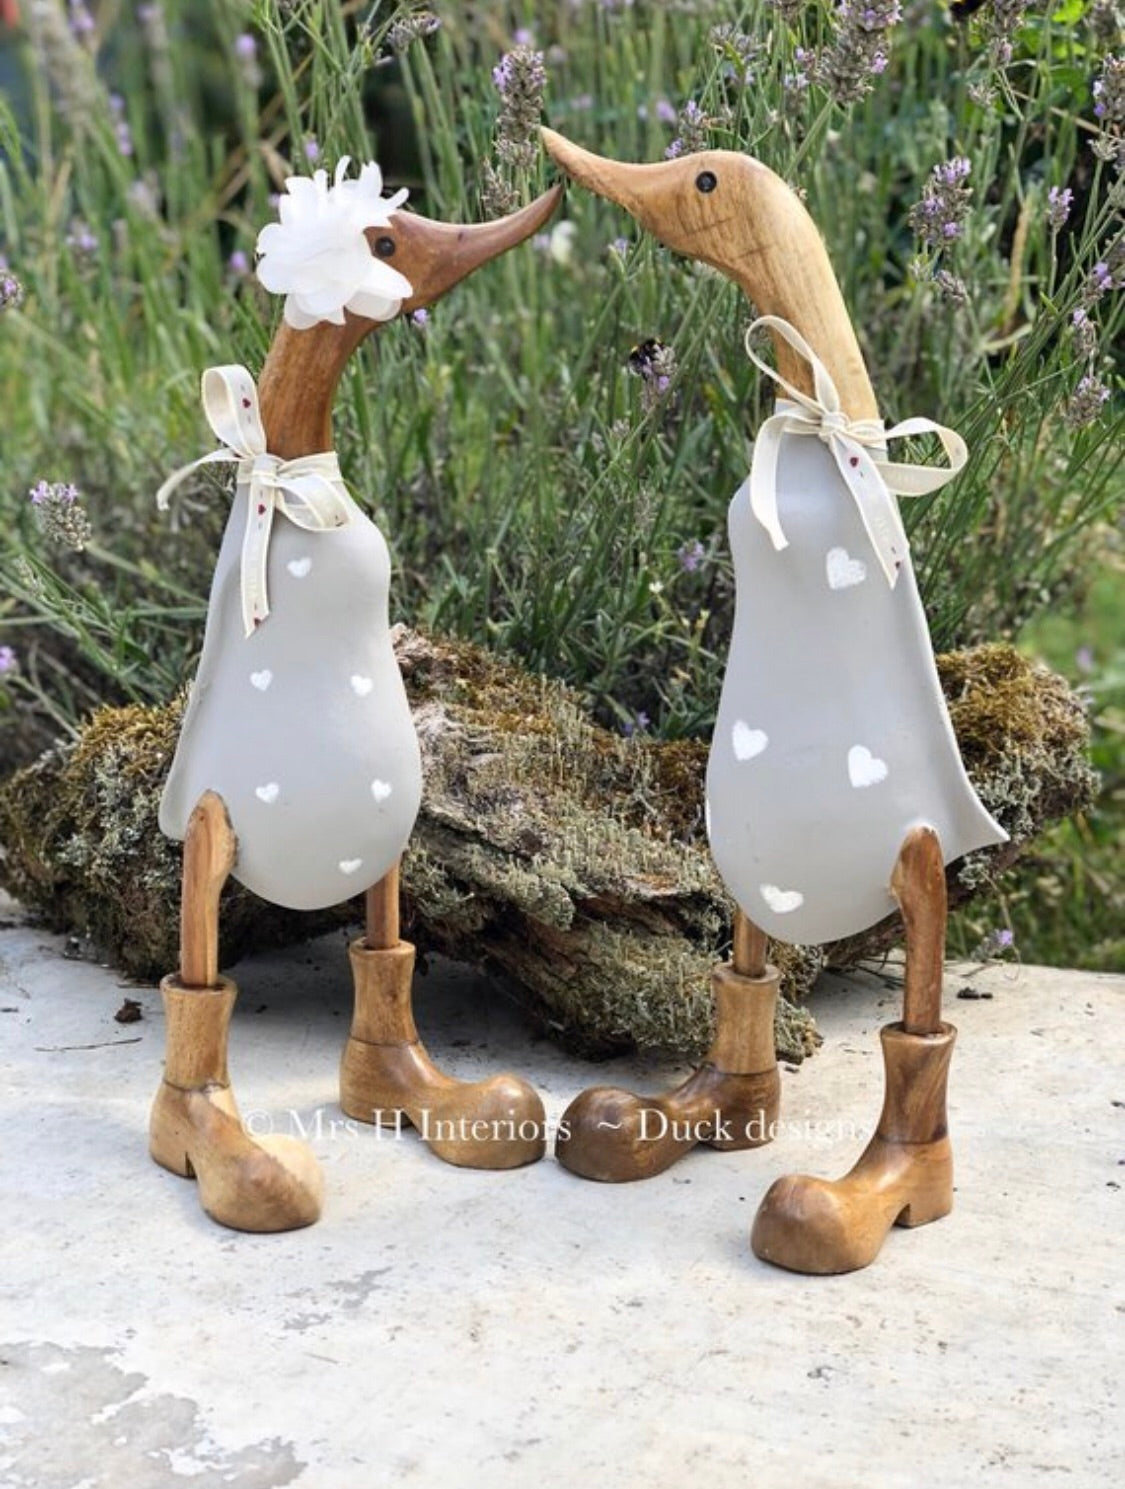 Love Duck - Pair - Decorated Wooden Duck in Boots by Mrs H the Duck Lady